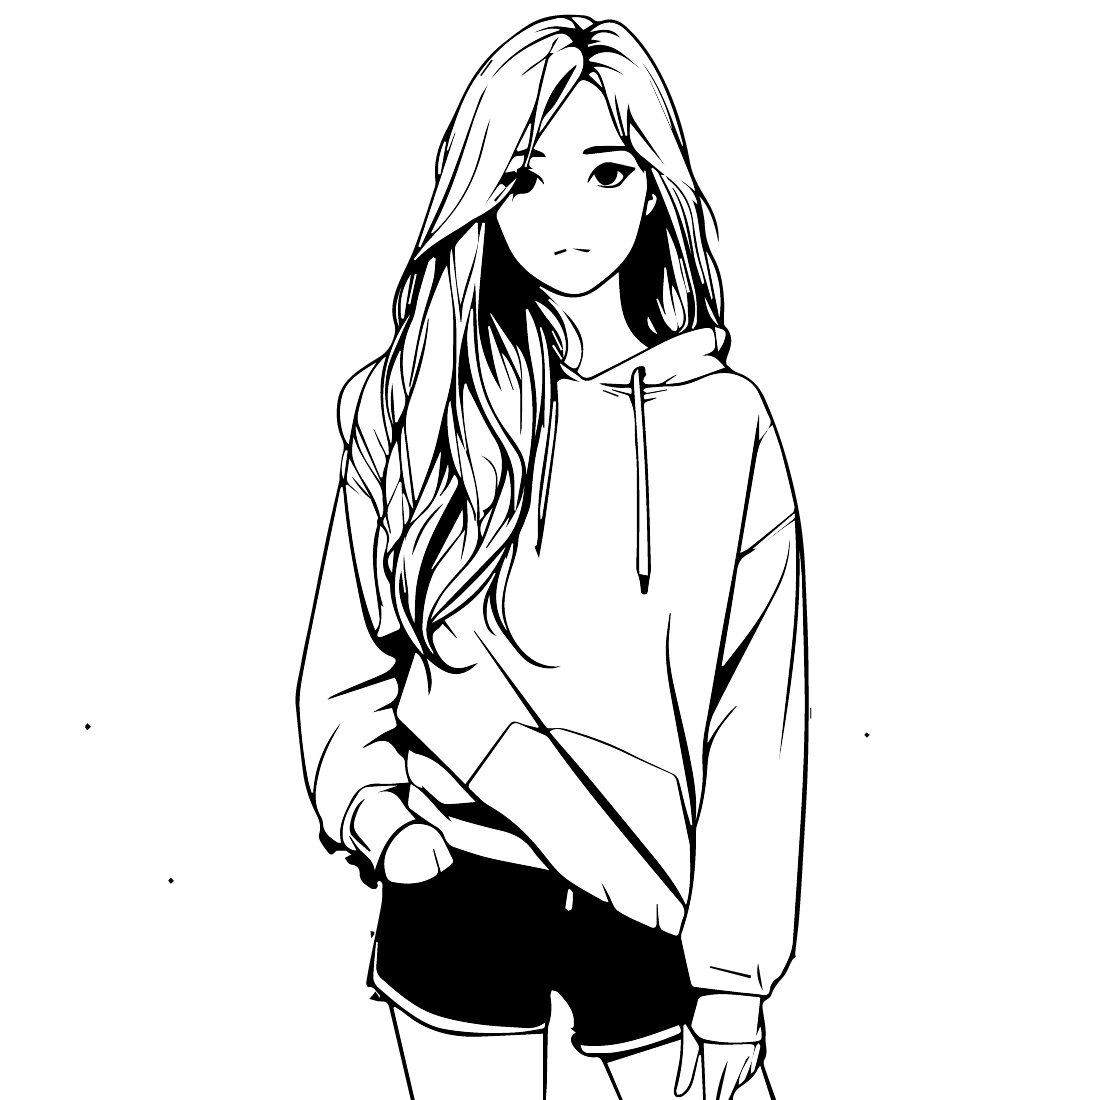 Sketch of beautiful anime girl. Anime girl line drawing. Can be colored.  Vector illustration Stock Vector